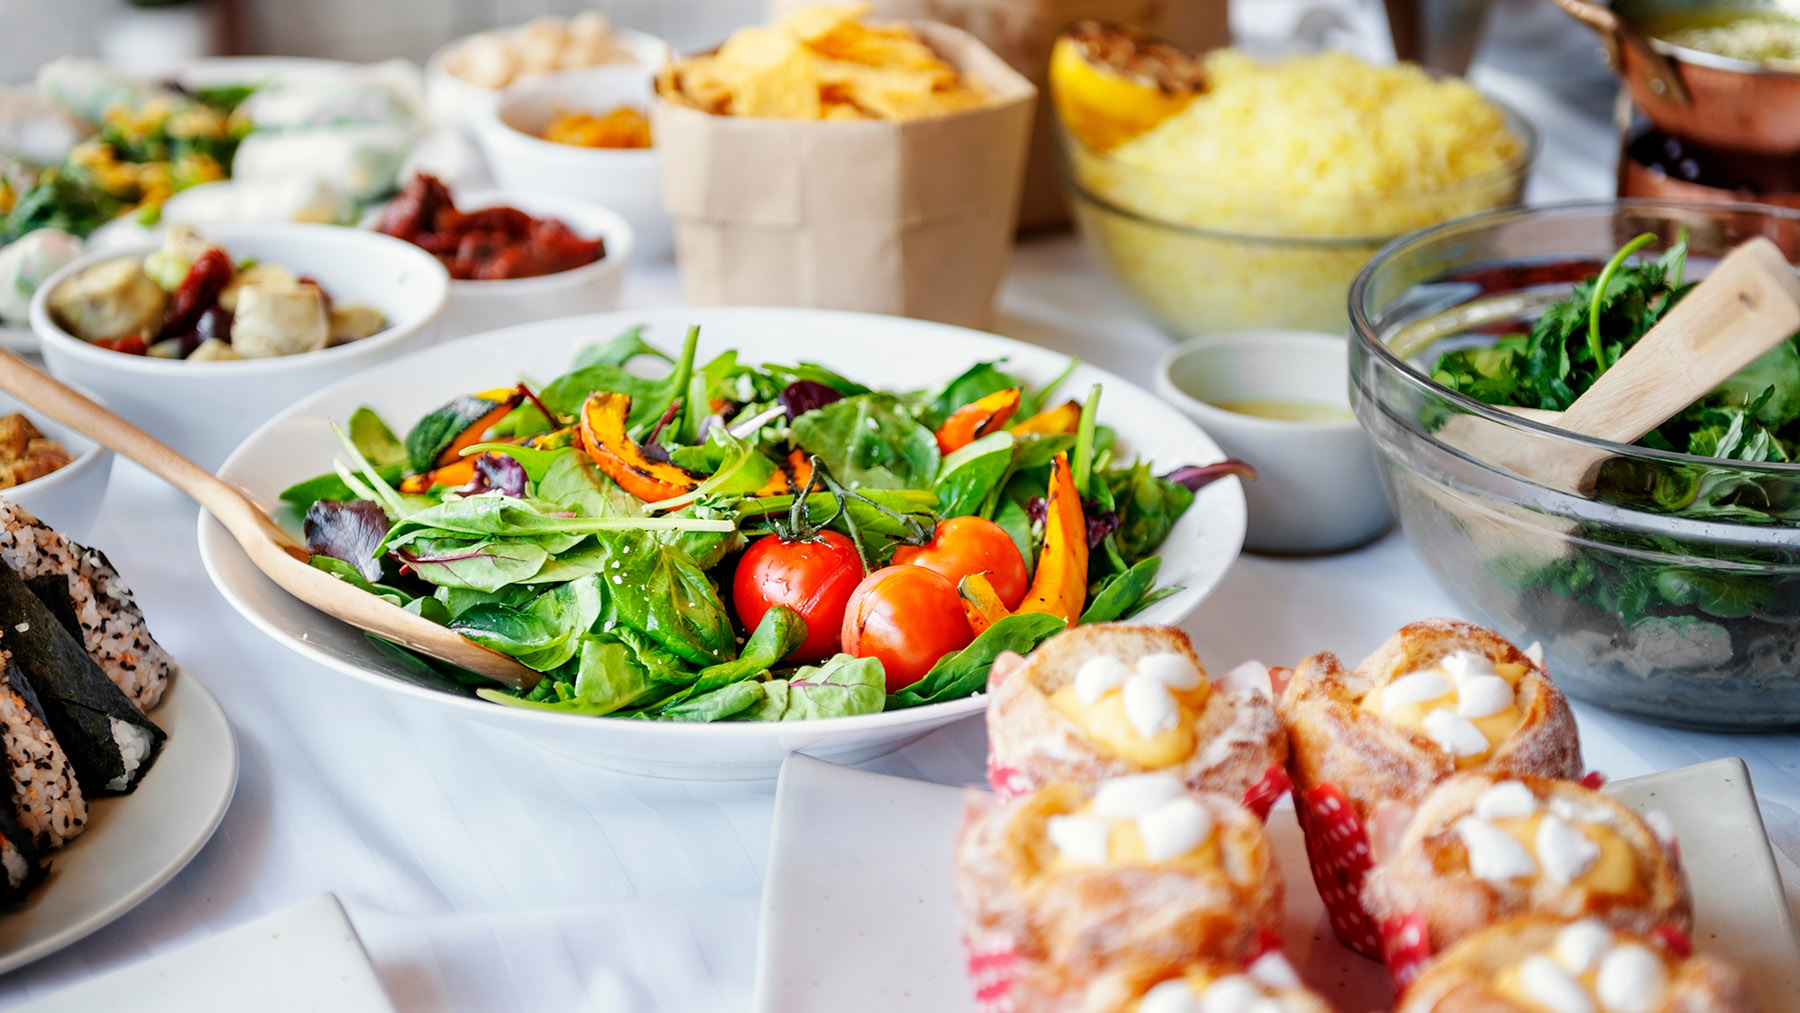 Stock photo of a table filled with fresh salads and other dishes (Image courtesy of RawPixel.com)